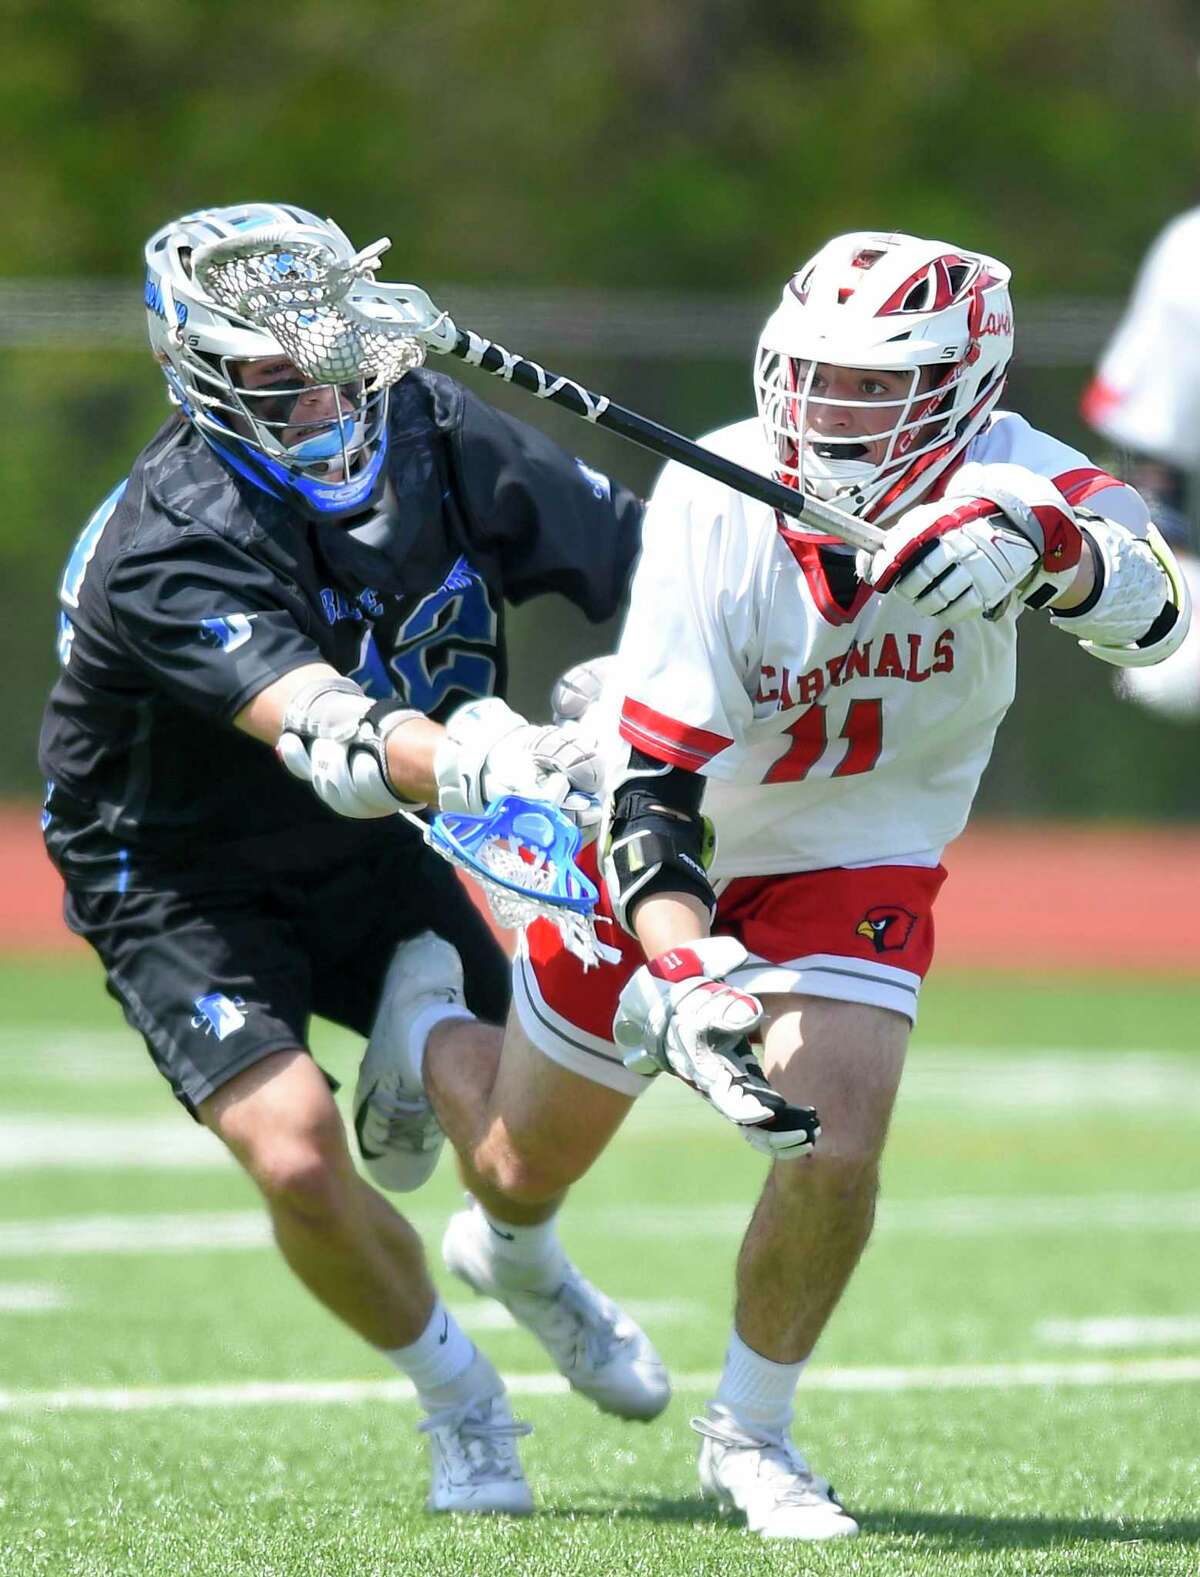 Darien's Bruce Ferguson (42) body checks Greenwich's Jack Cook (11) during a boys lacrosse match at Cardinal Stadium on May 4, 2019 in Greenwich, Connecticut. Darien defeated Greenwich 15-0.